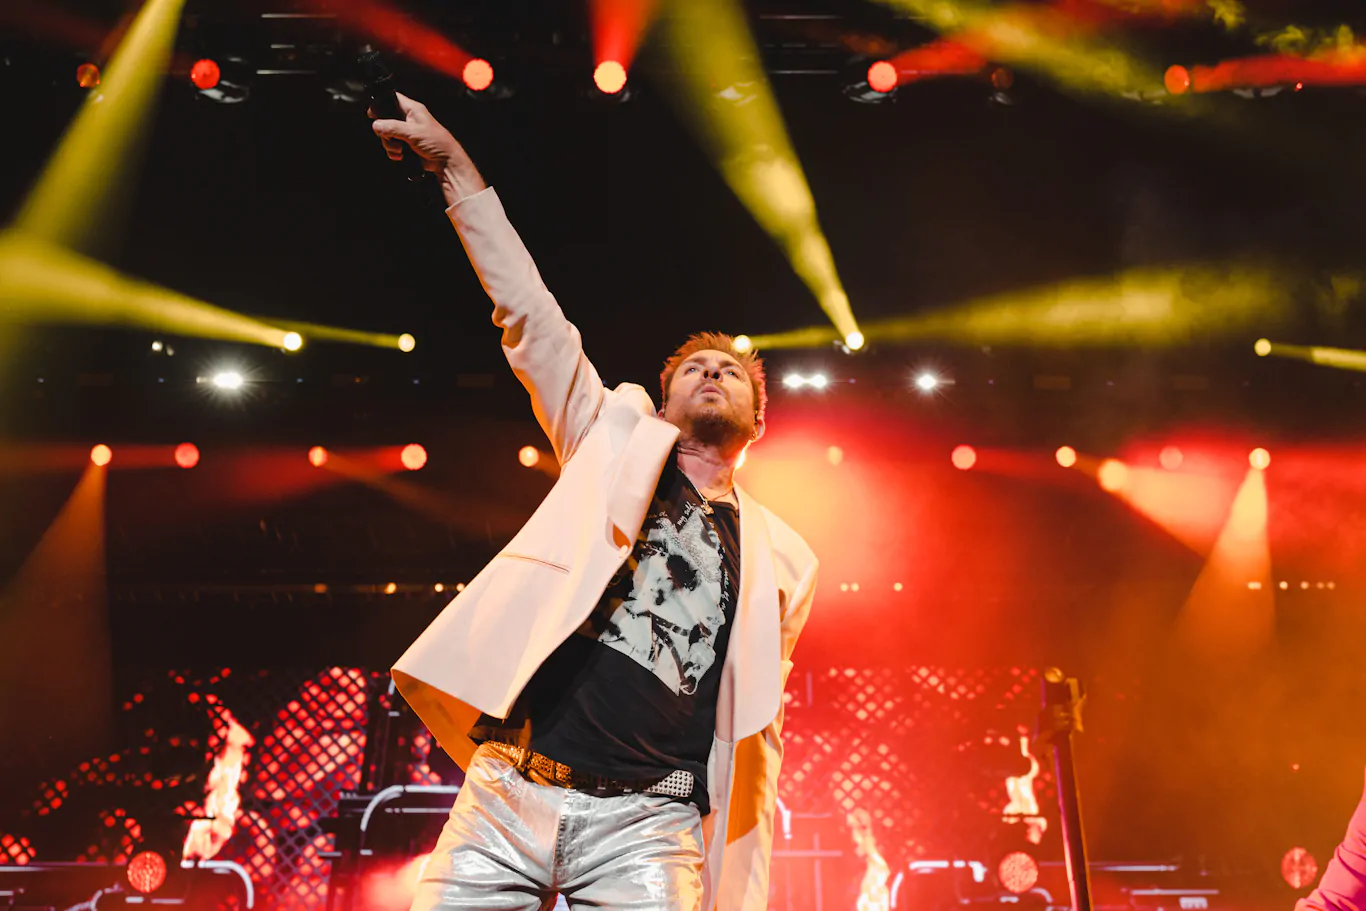 DURAN DURAN confirm Jake Shears and LIA LIA will join their FUTURE PAST UK and Ireland tour